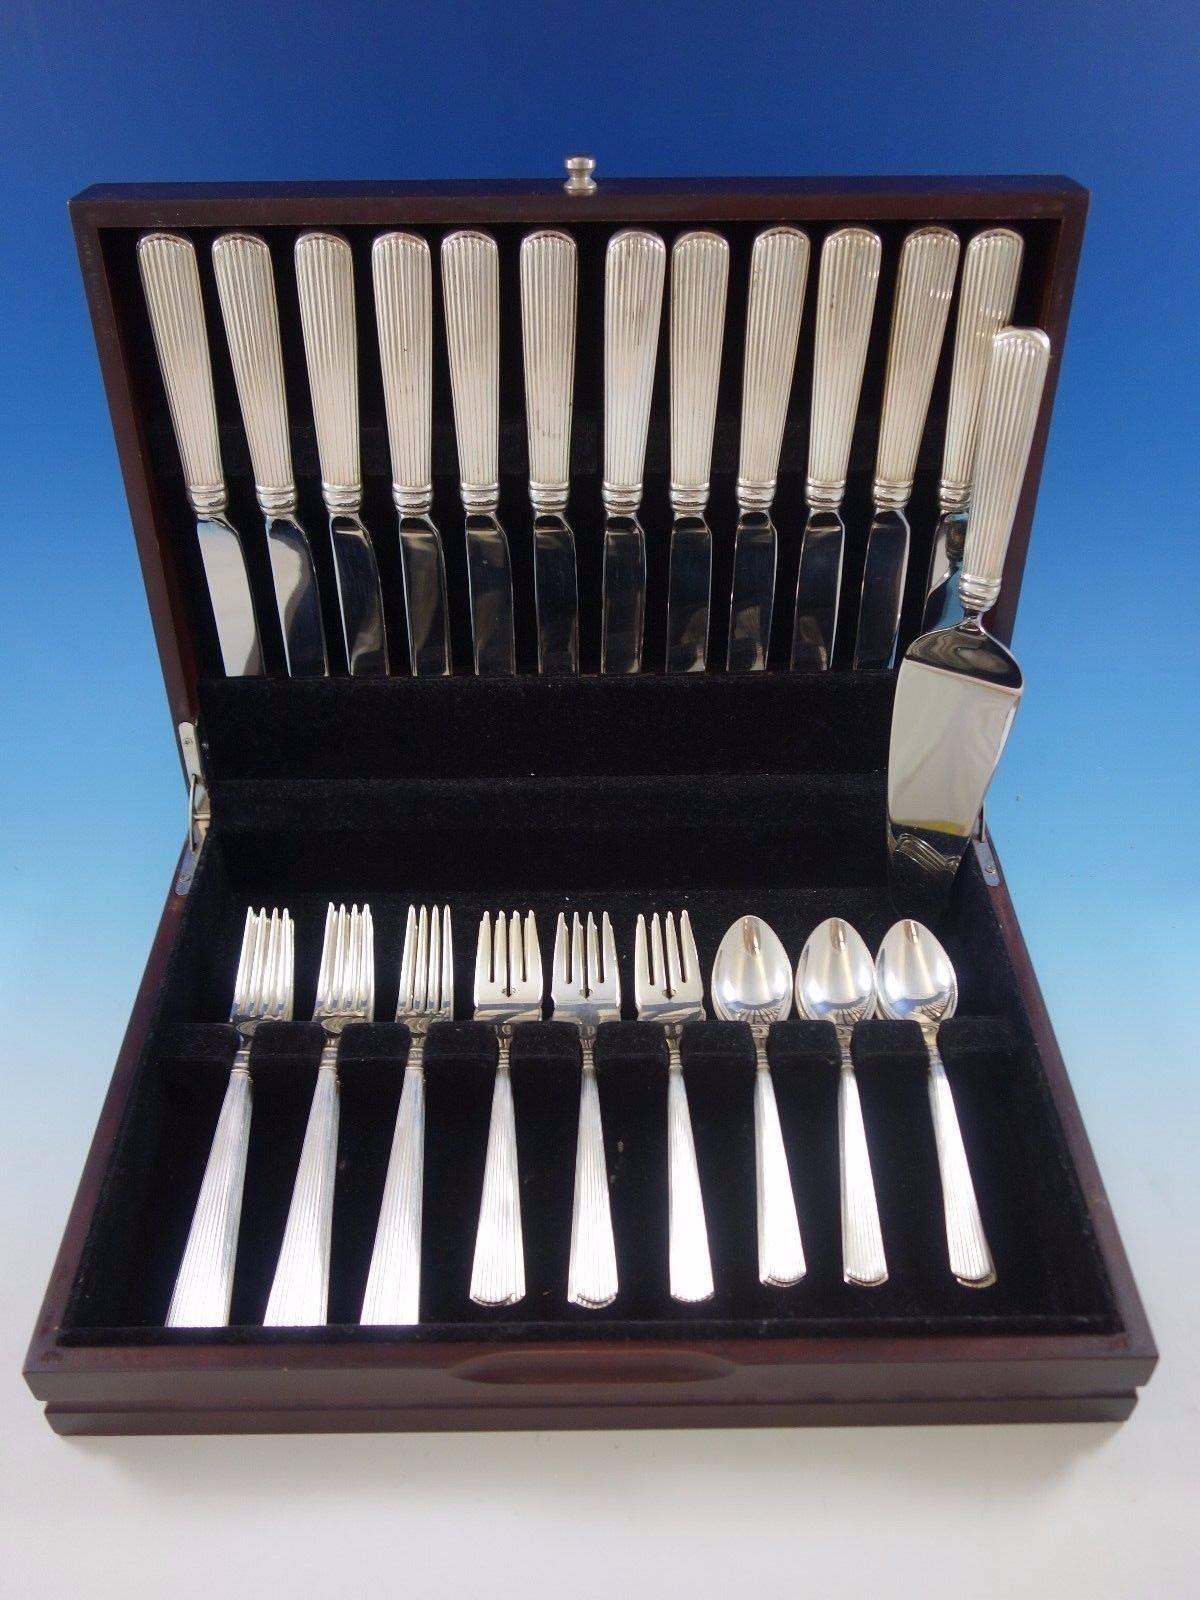 Ashmont by Reed and Barton sterling silver flatware set, 49 pieces. This set includes: 

12 dinner size knives, 9 7/8